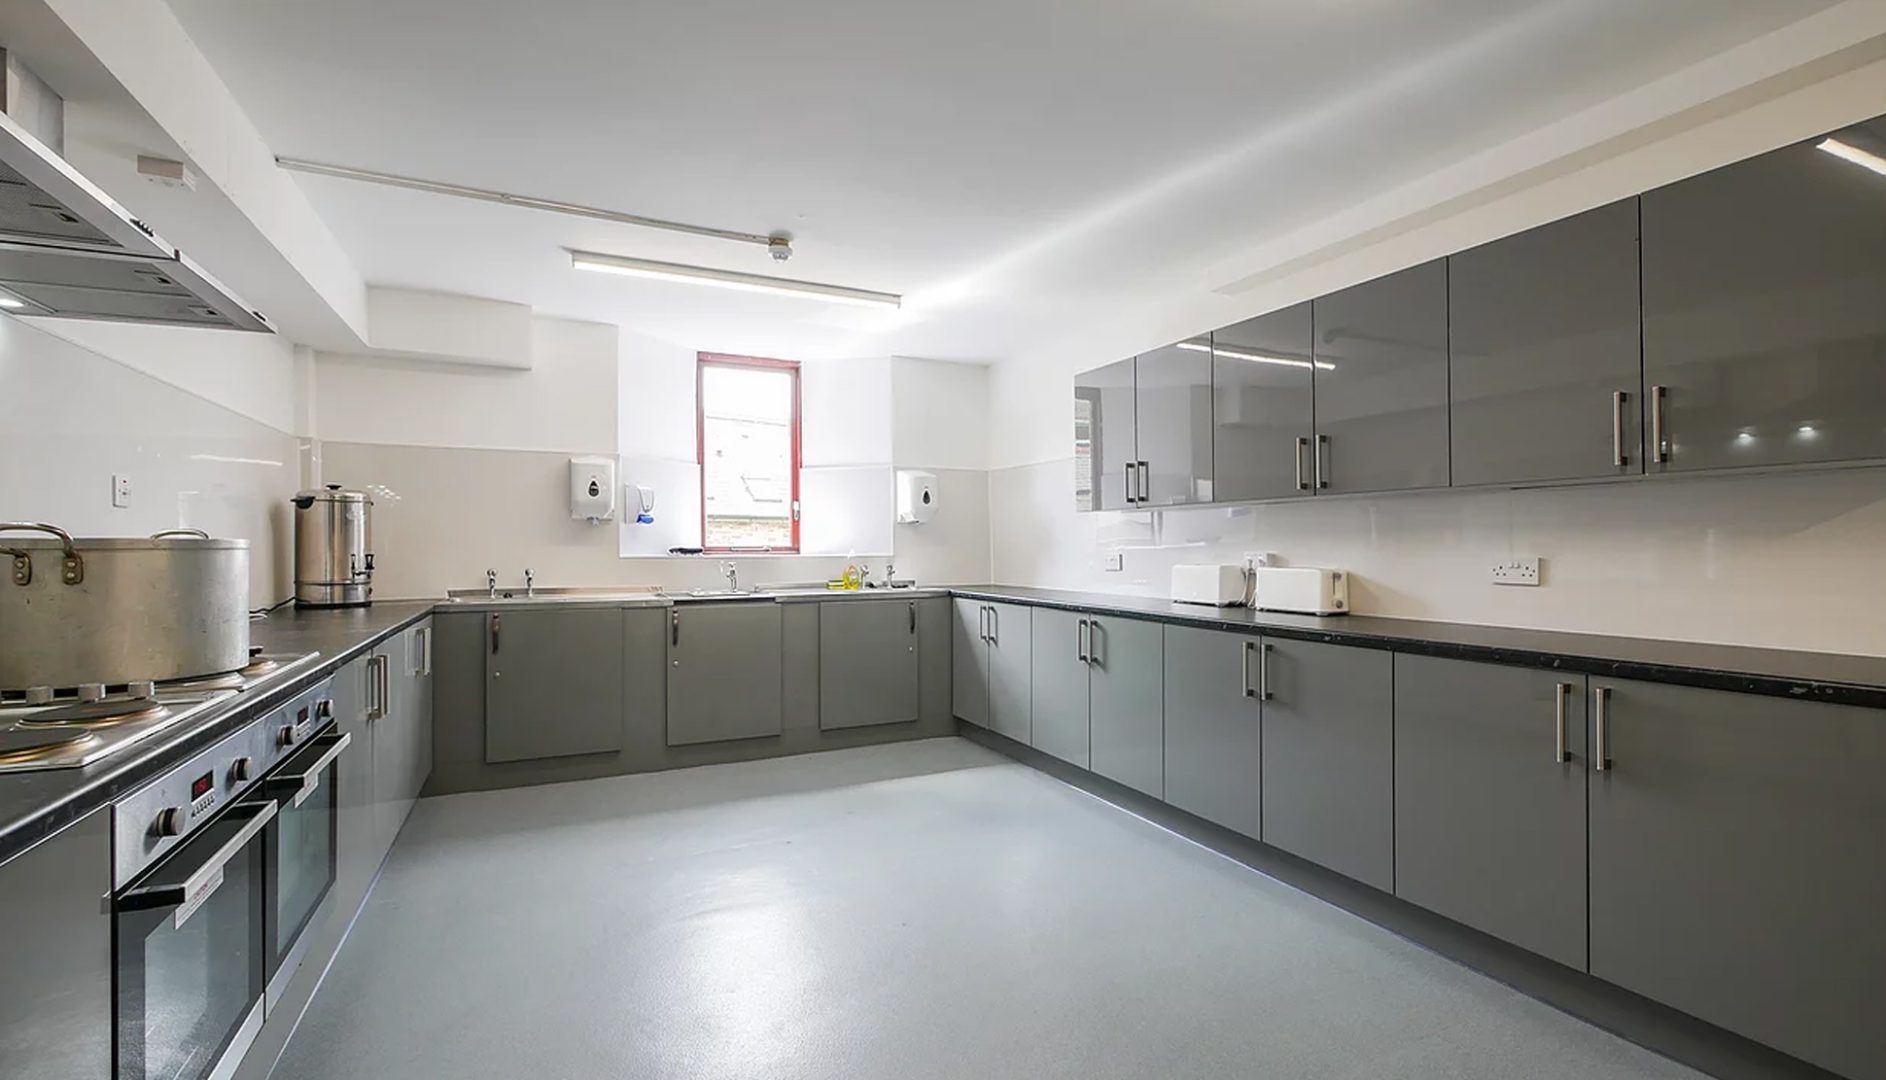 grey, large kitchen with a window at the back